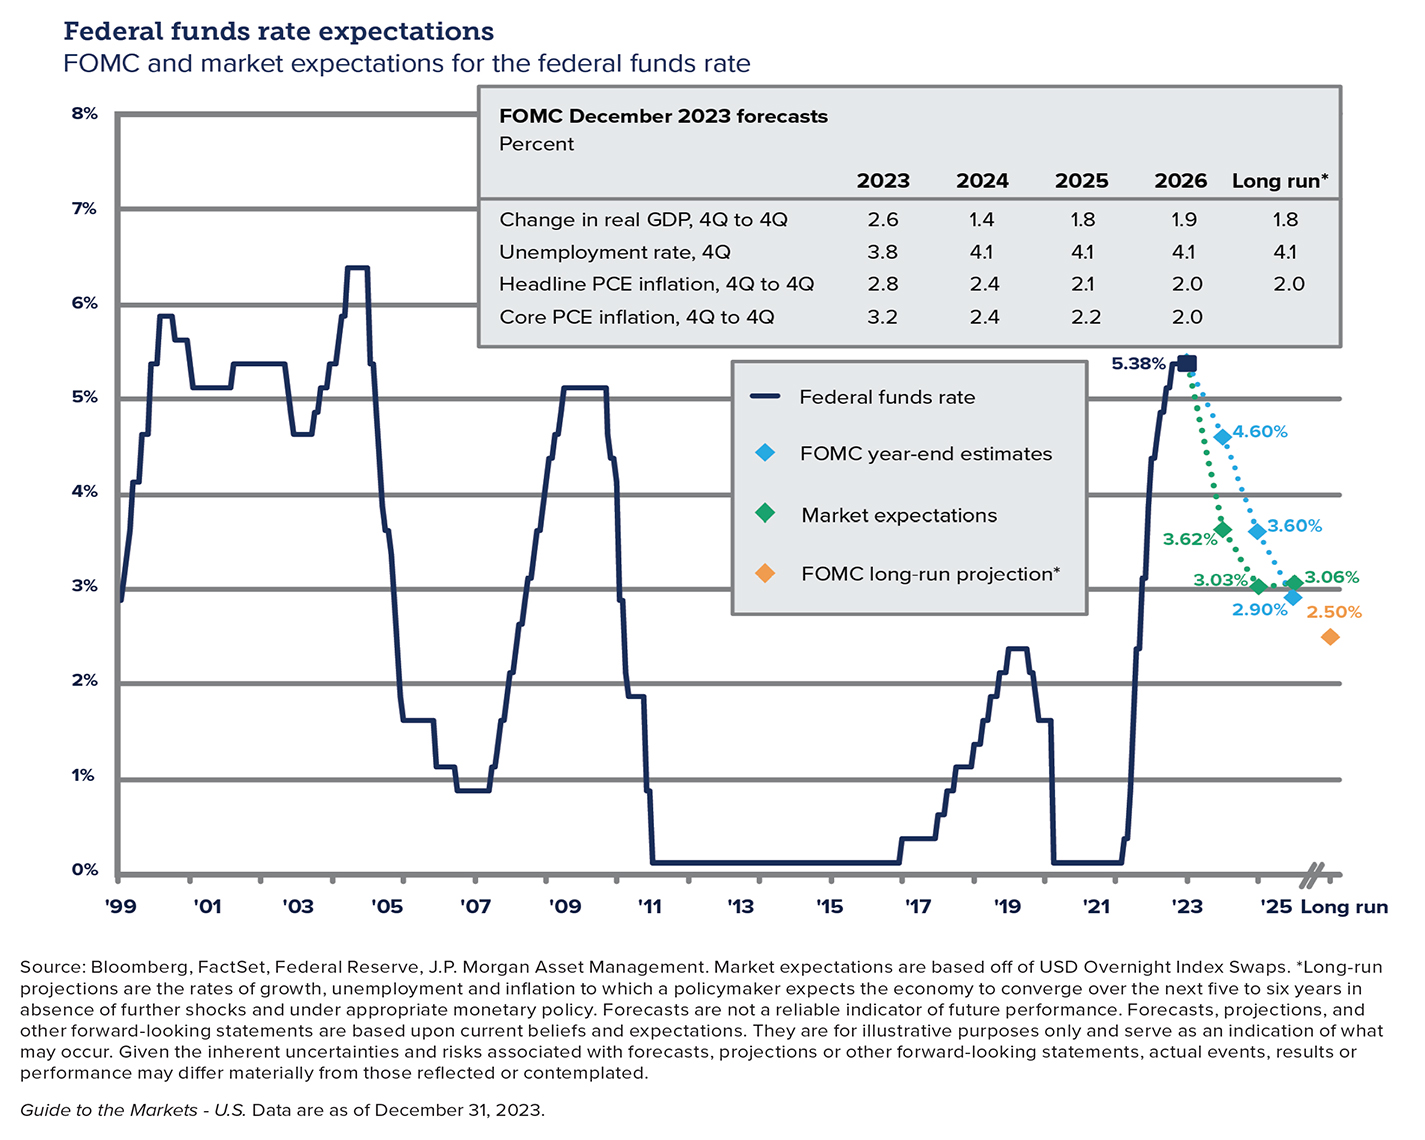 Chart showing federal fund rate expectations